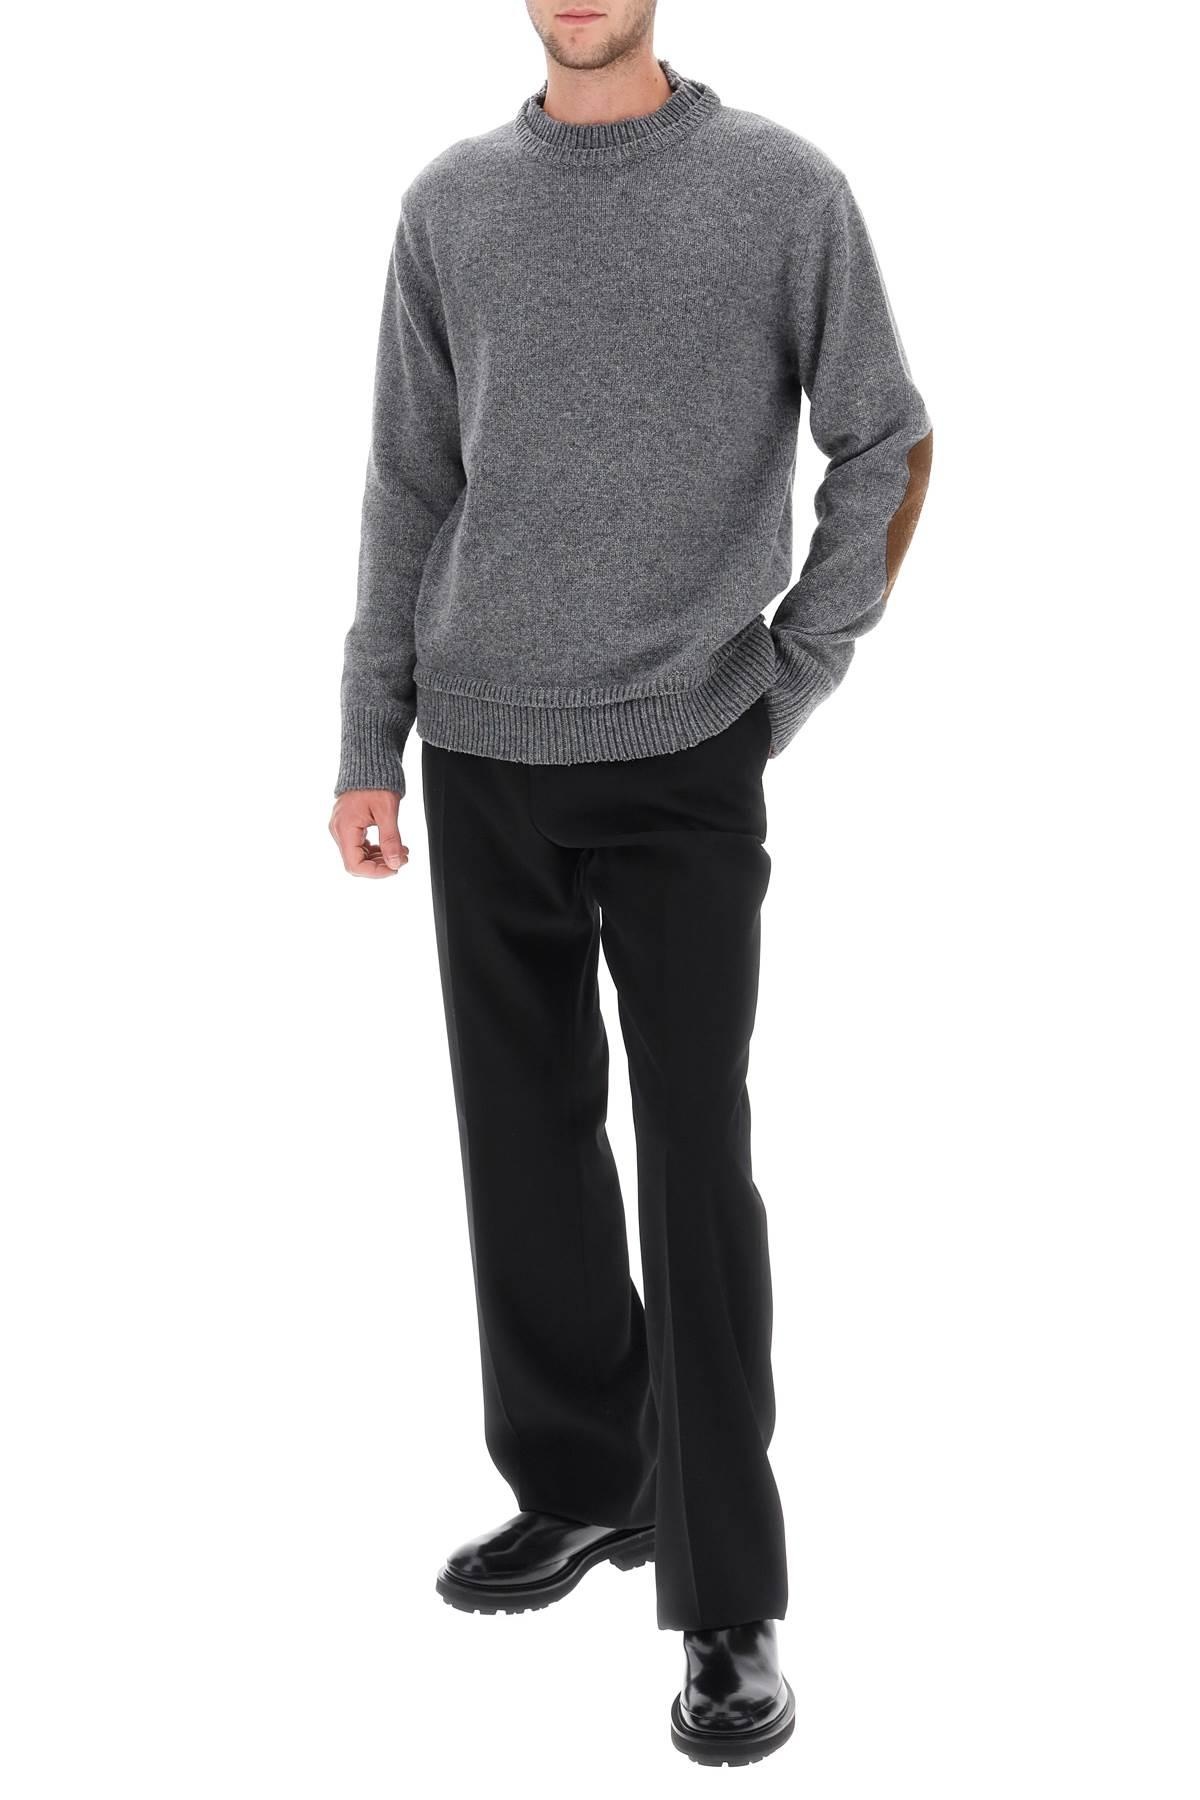 CREW NECK SWEATER WITH ELBOW PATCHES - 2